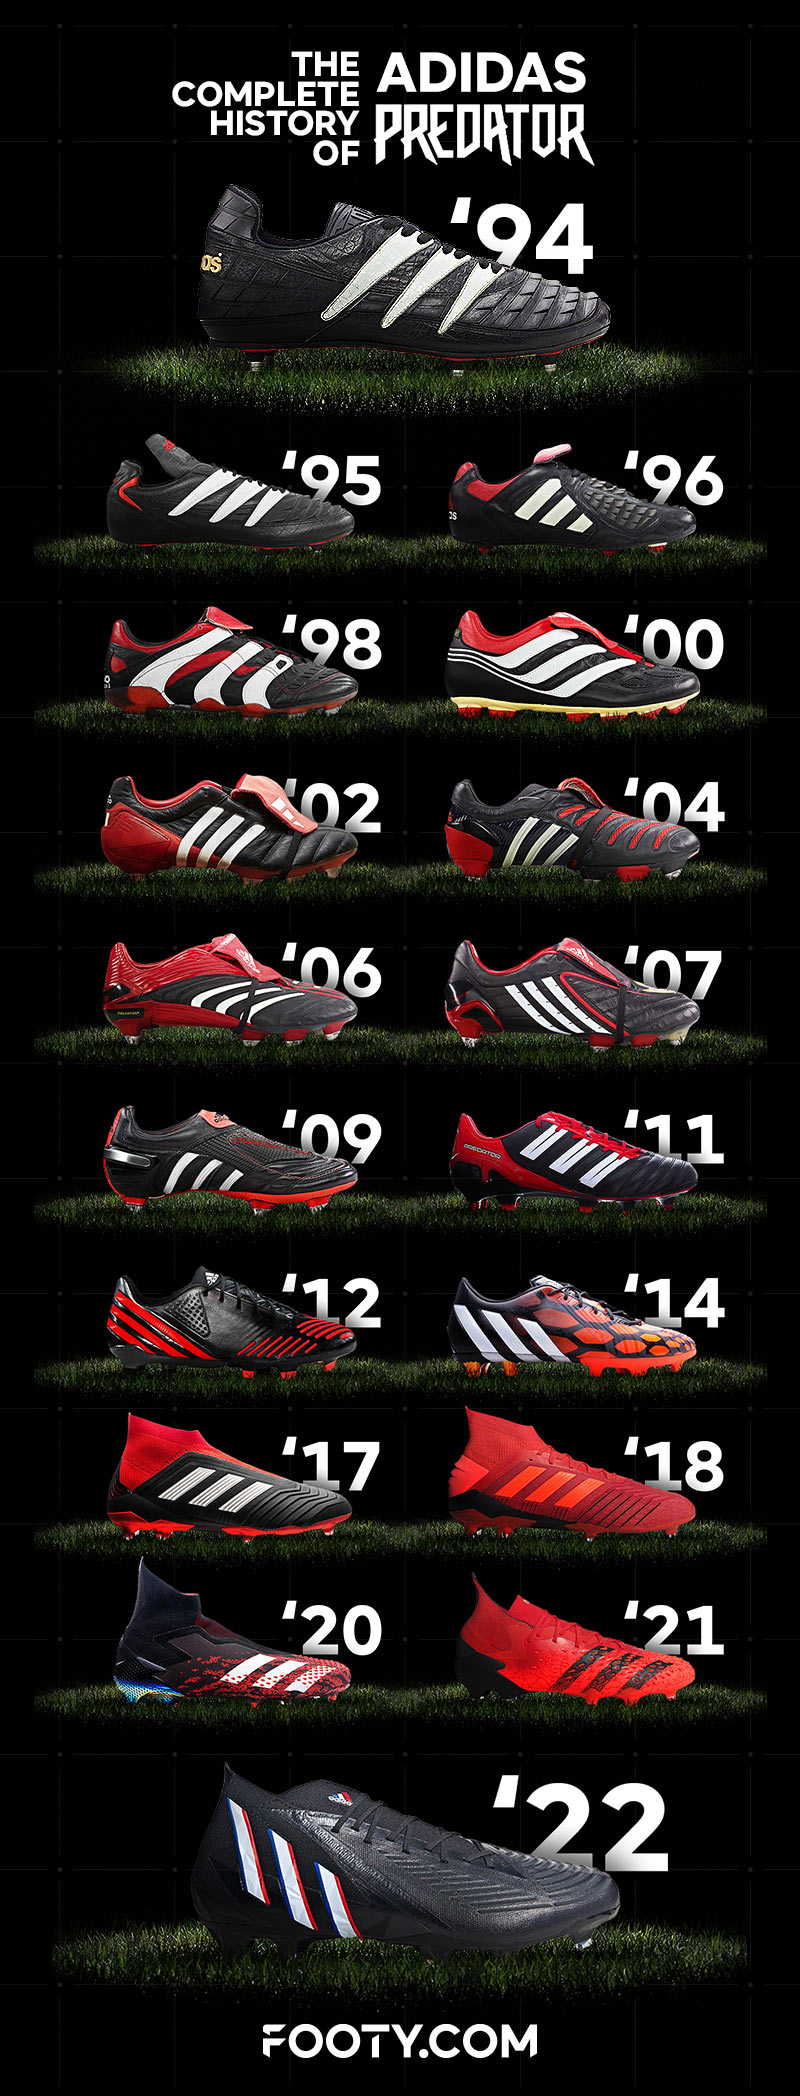 complete history timeline of adidas predator football boots from 1994 to 2022